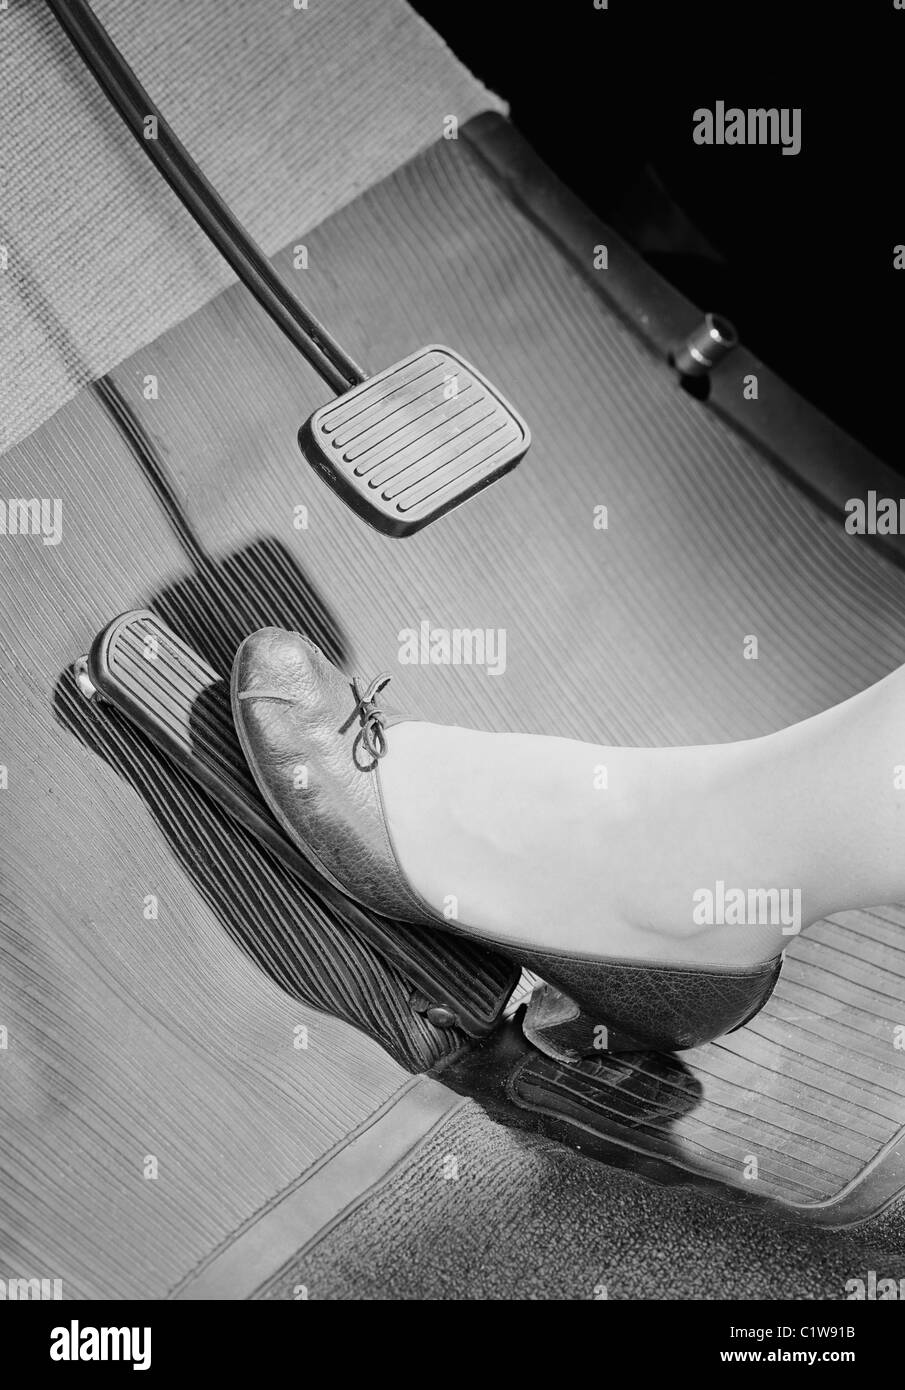 Womans foot on car brake pedal Stock Photo